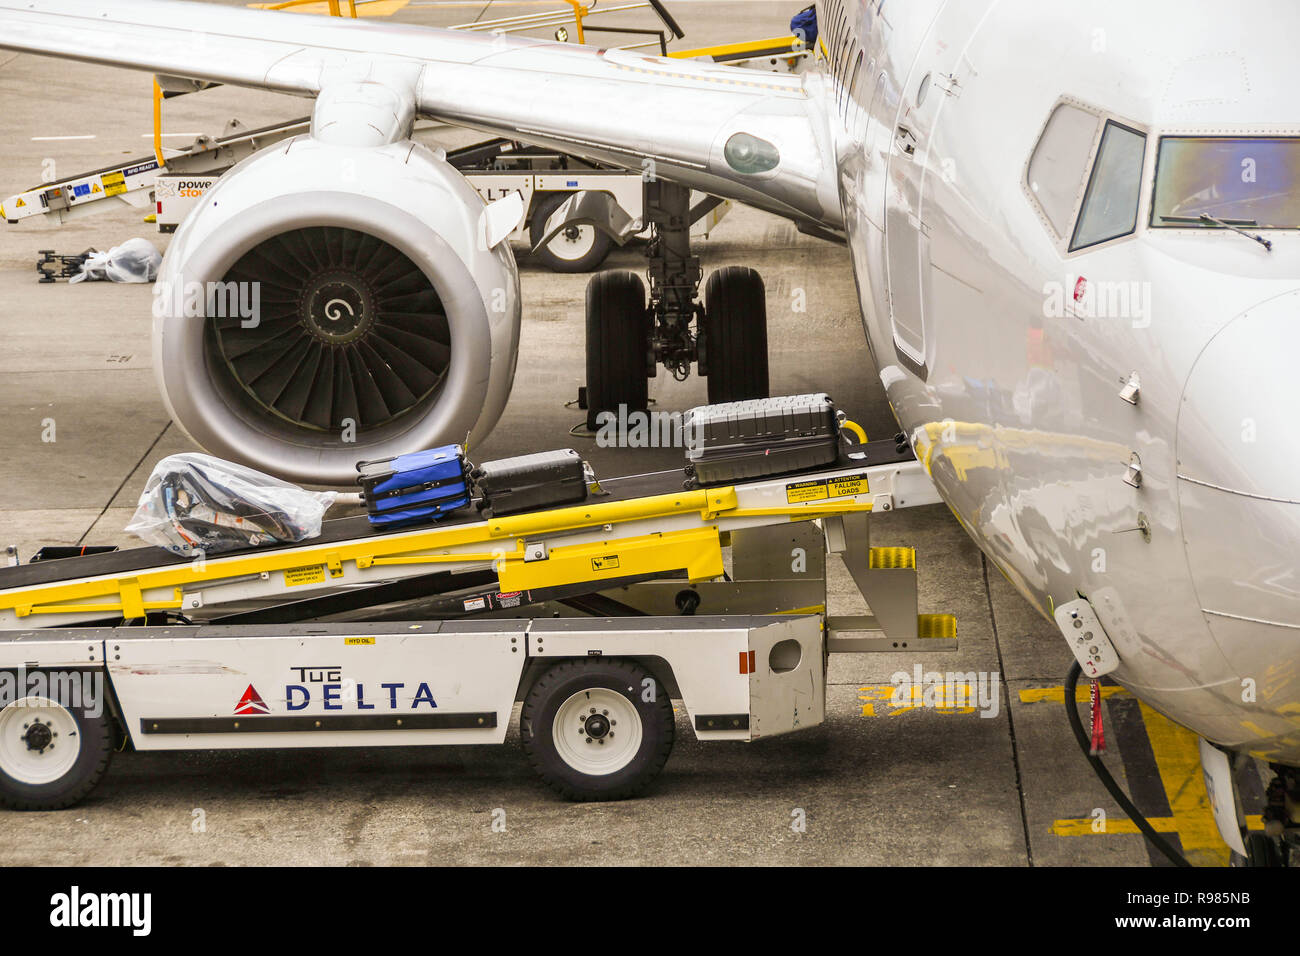 SEATTLE TACOMA AIRPORT, WA, USA - JUNE 2018: Ground handling equipment loading luggage into the hold of a Delta Airlines Boeing 737 jet at Seattle Tac Stock Photo